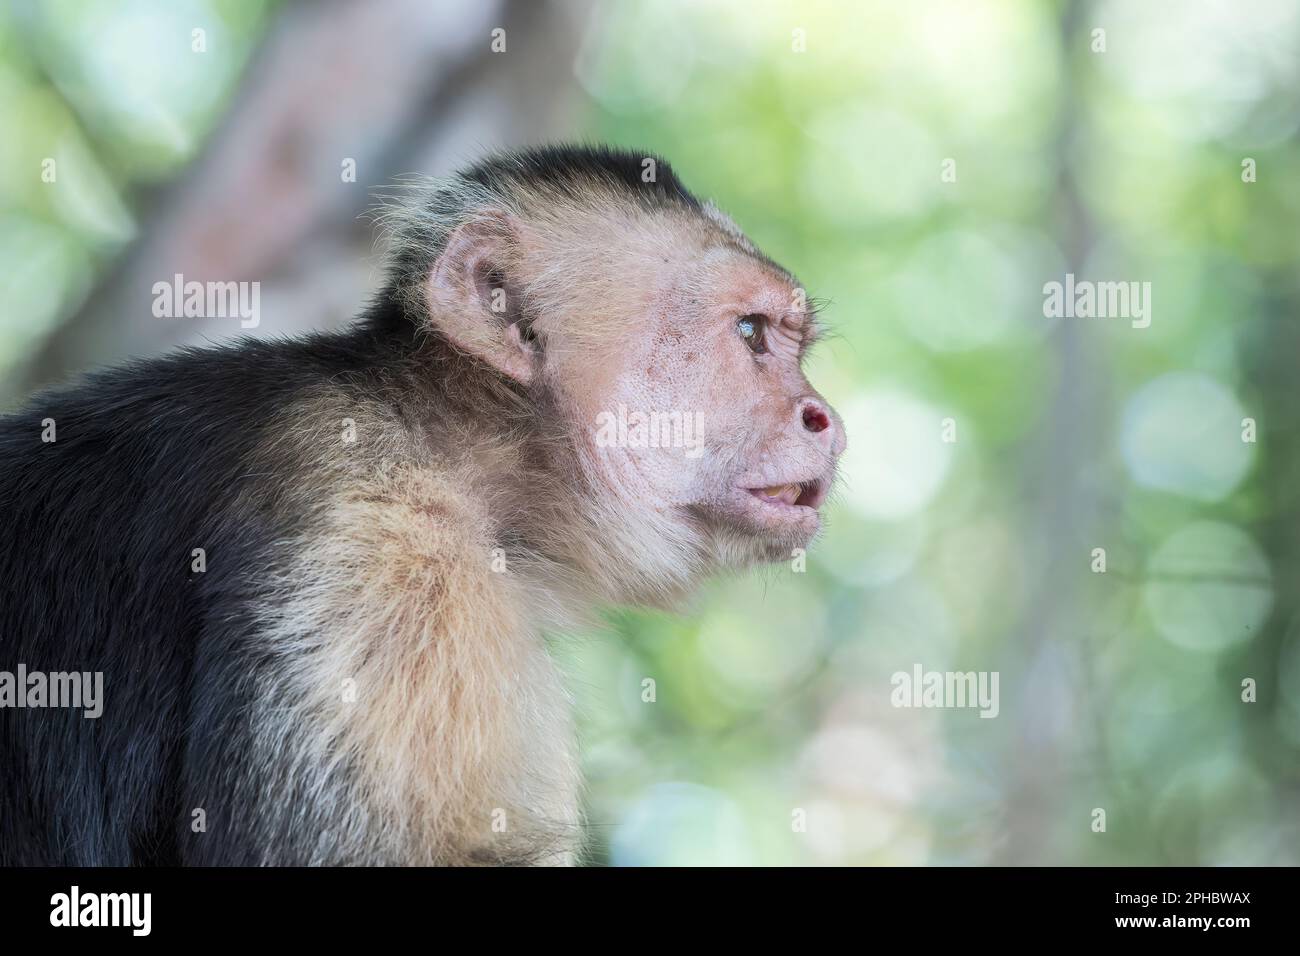 Panamanian white-faced capuchin monkey, Cebus imitator, close up of face of adult resting in tree in forest, Panama Stock Photo